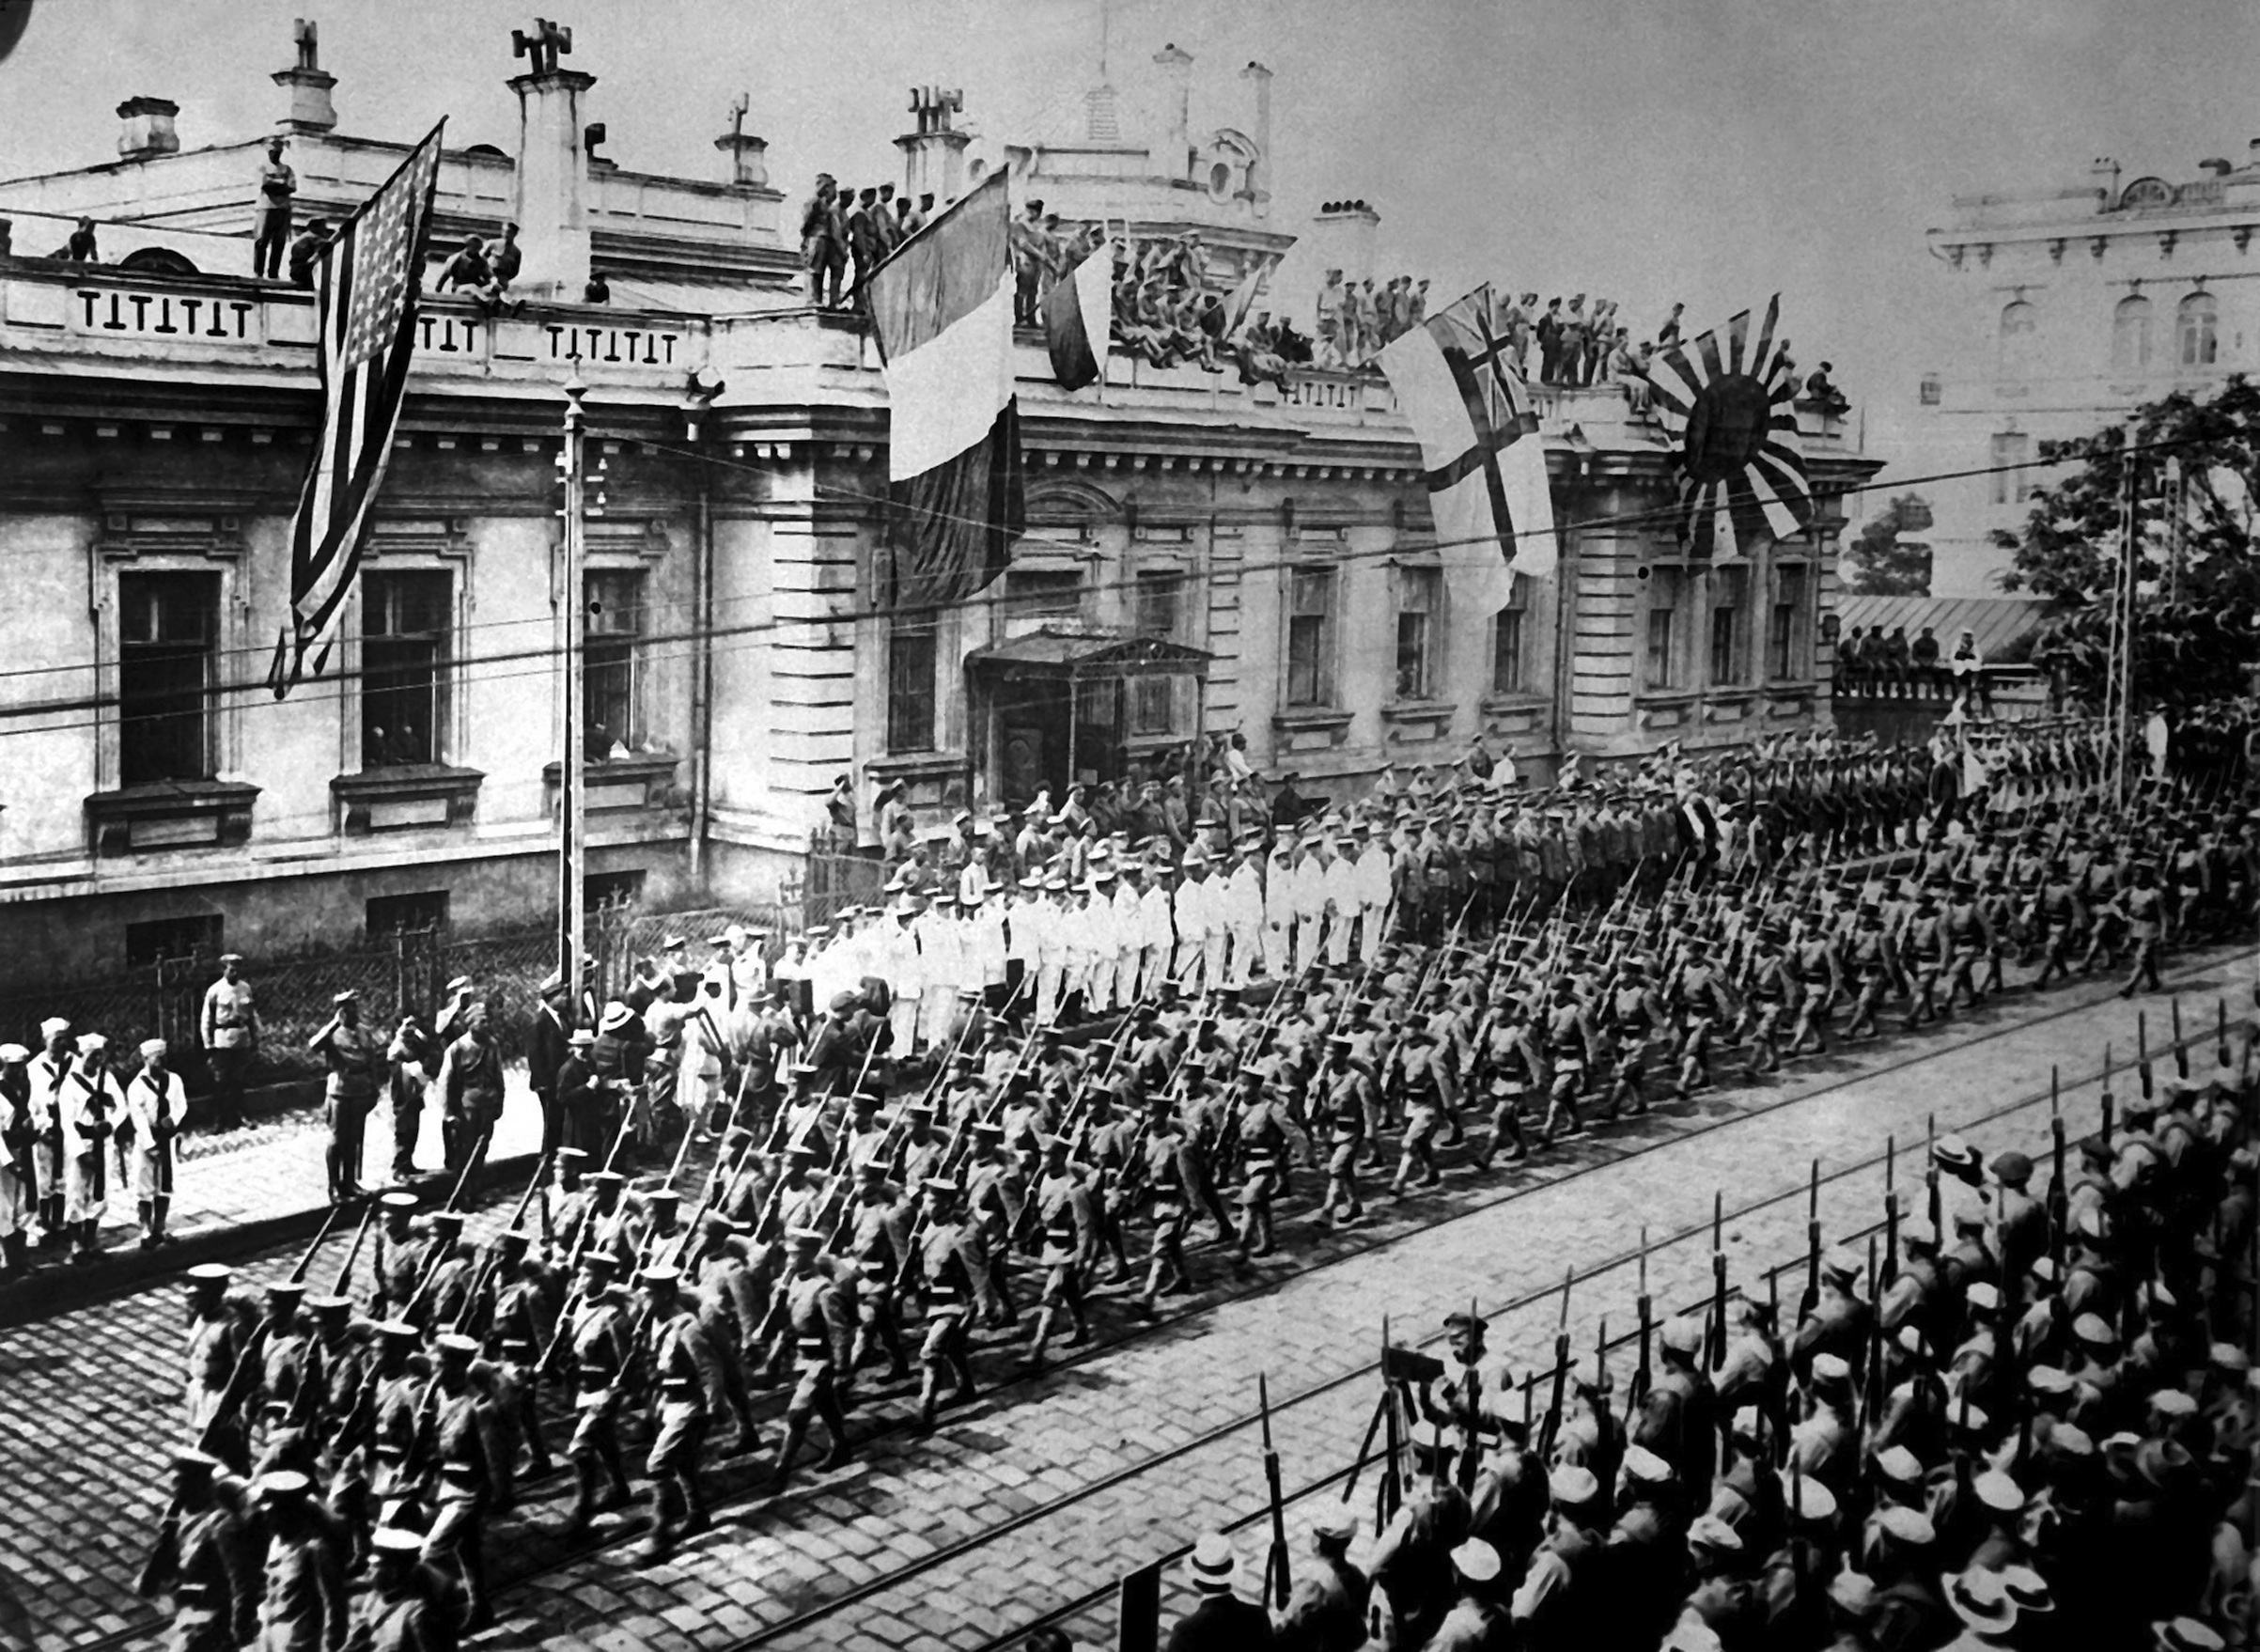 Allied soldiers and sailors in Vladivostok, Russia, September 1918. Several foreign powers sent troops to fight on the White (anti-Bolshevik) side in the Russian Civil War. American, French, British and Japanese flags fly from the building in the background. (Heritage Images/Getty Images)